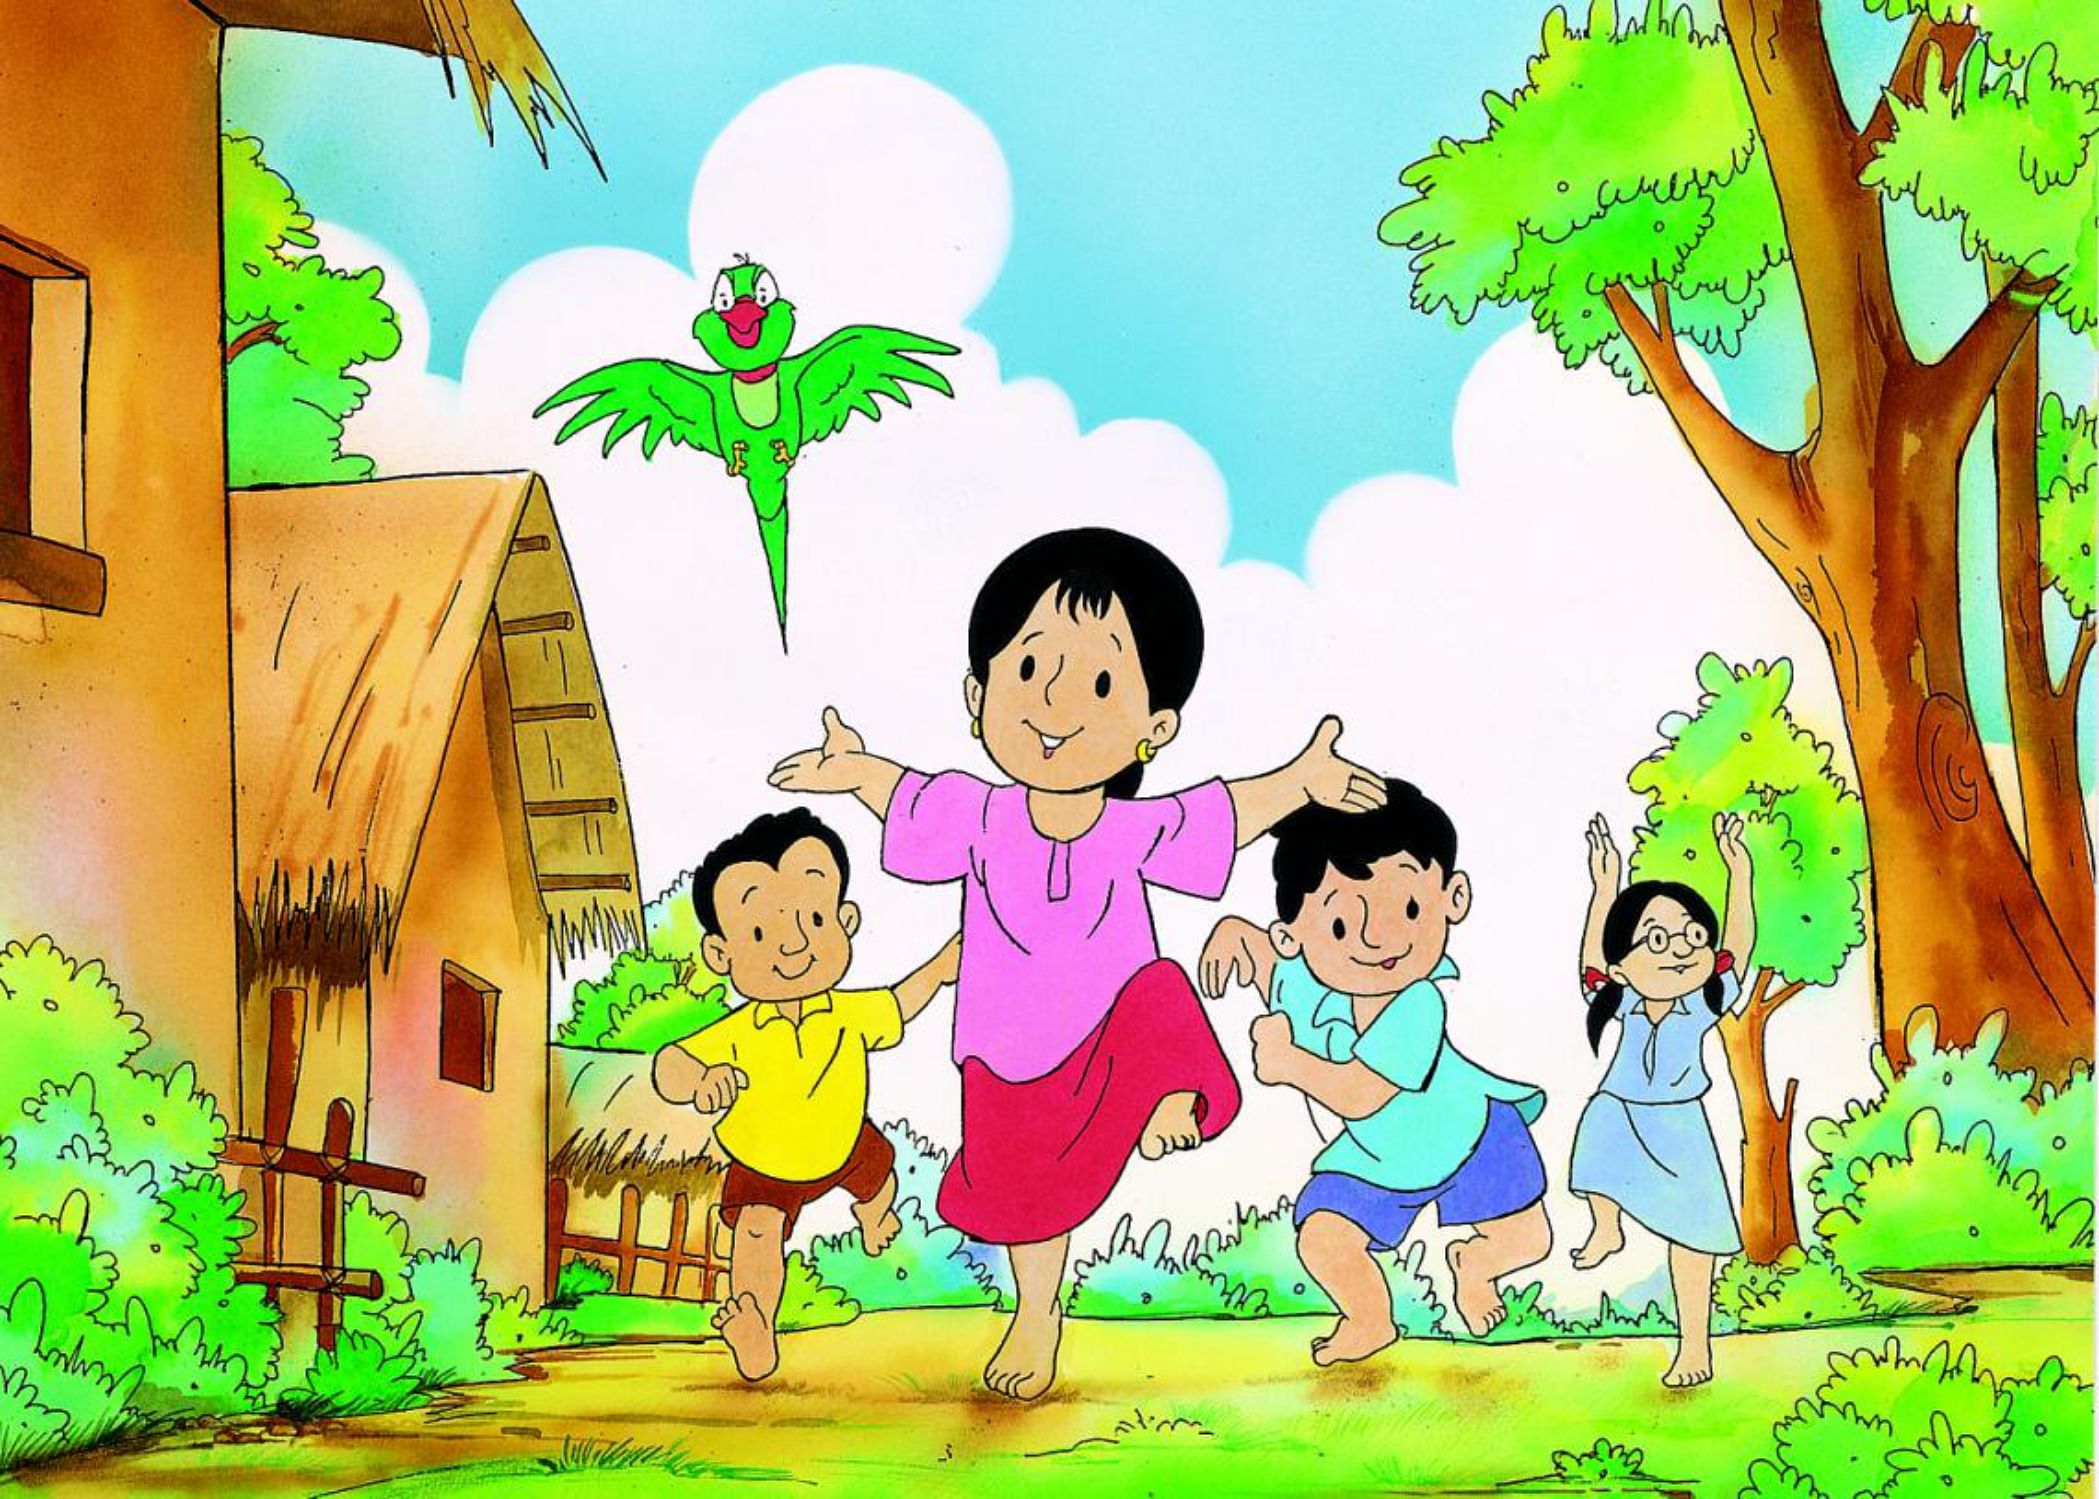 Lessons to still learn from the 'Meena' cartoon | The Daily Star